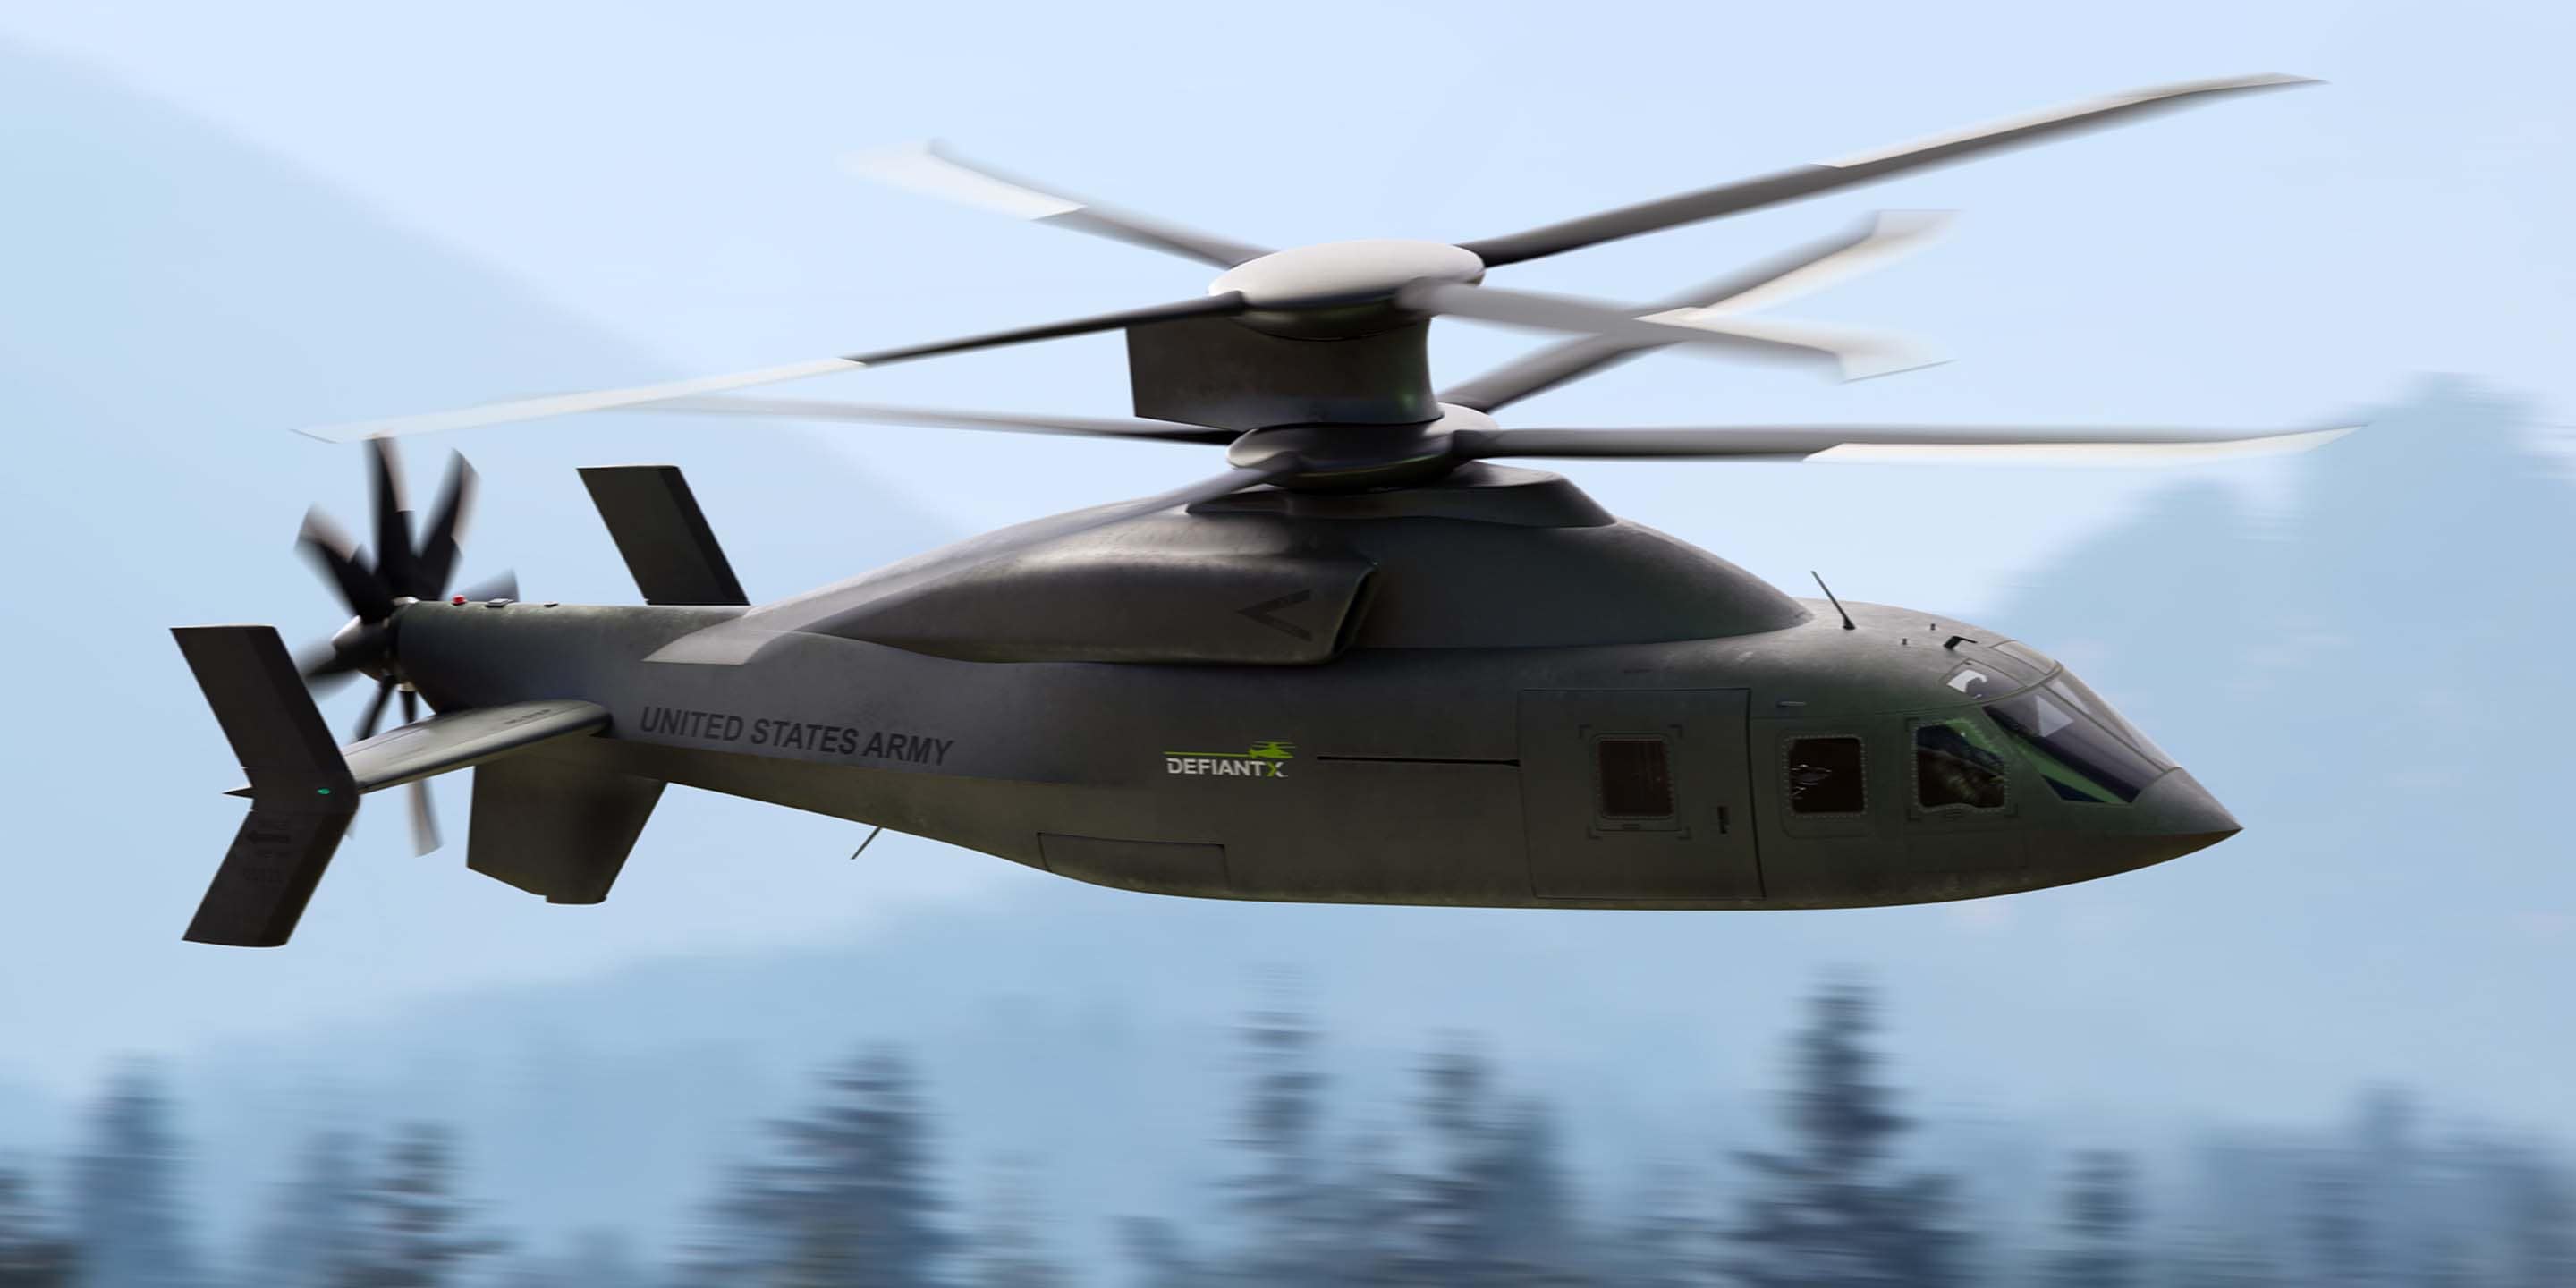 future military helicopter designs